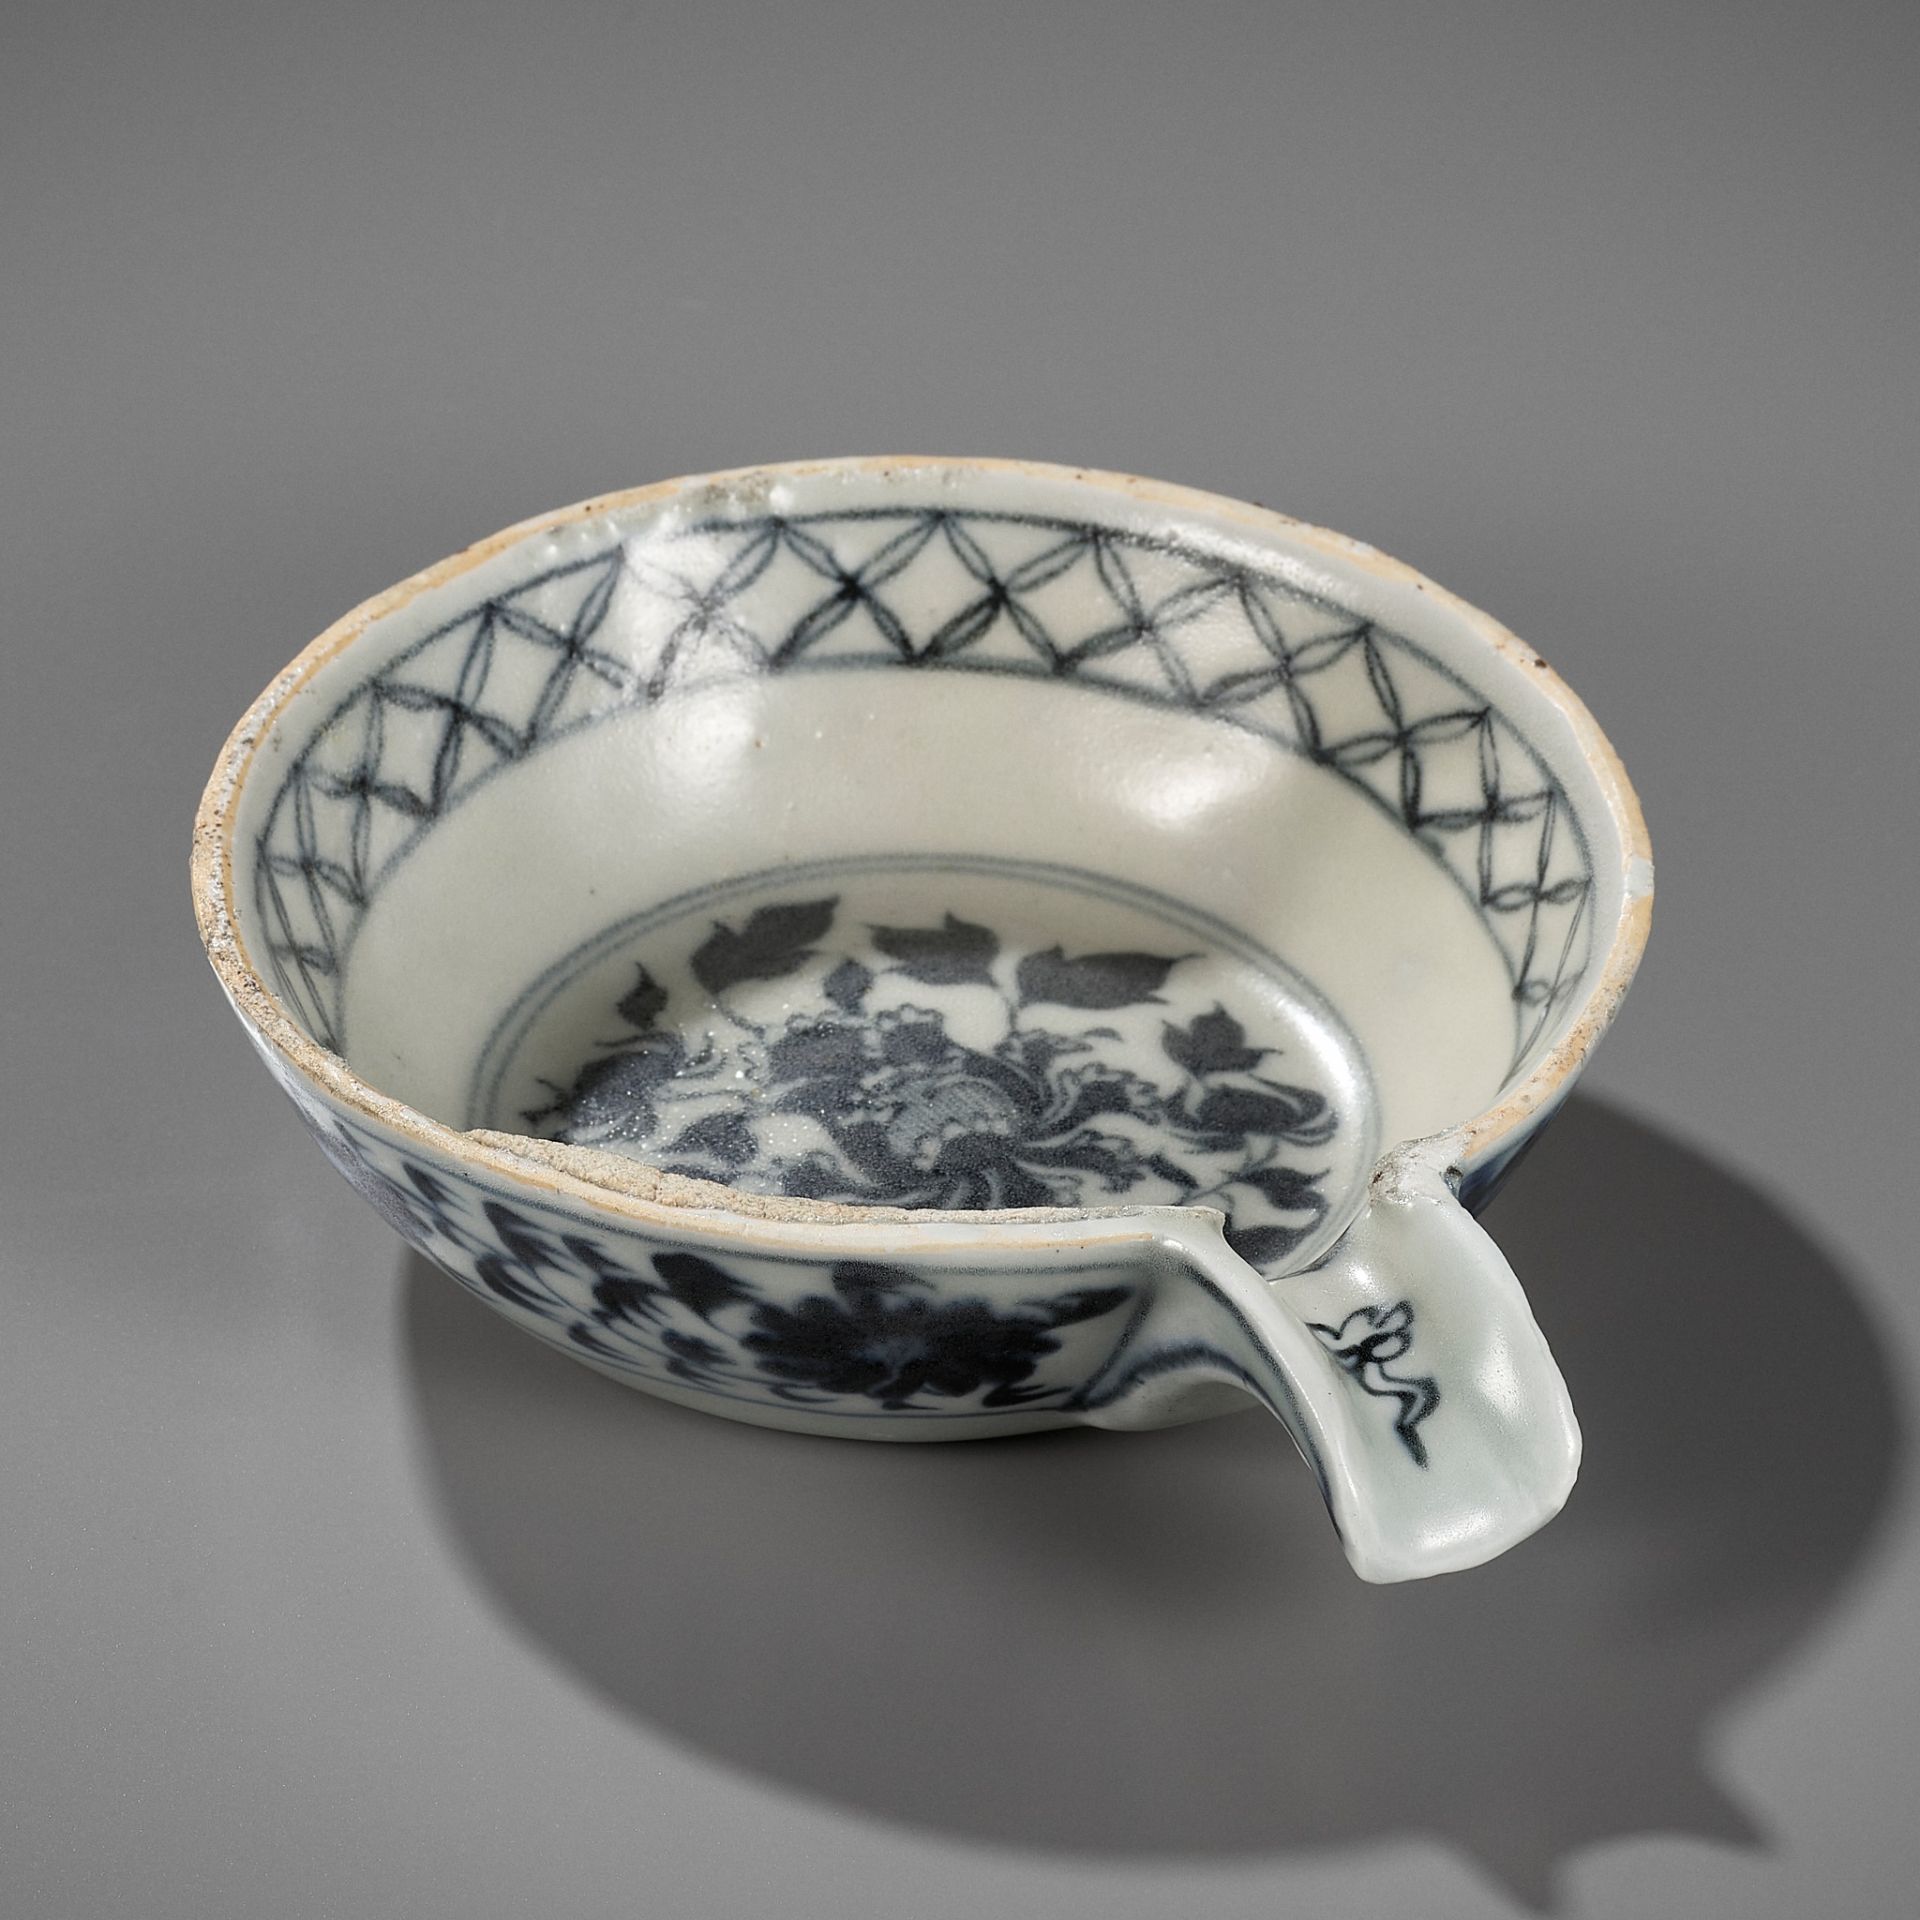 A BLUE AND WHITE POURING BOWL, YI, YUAN DYNASTY